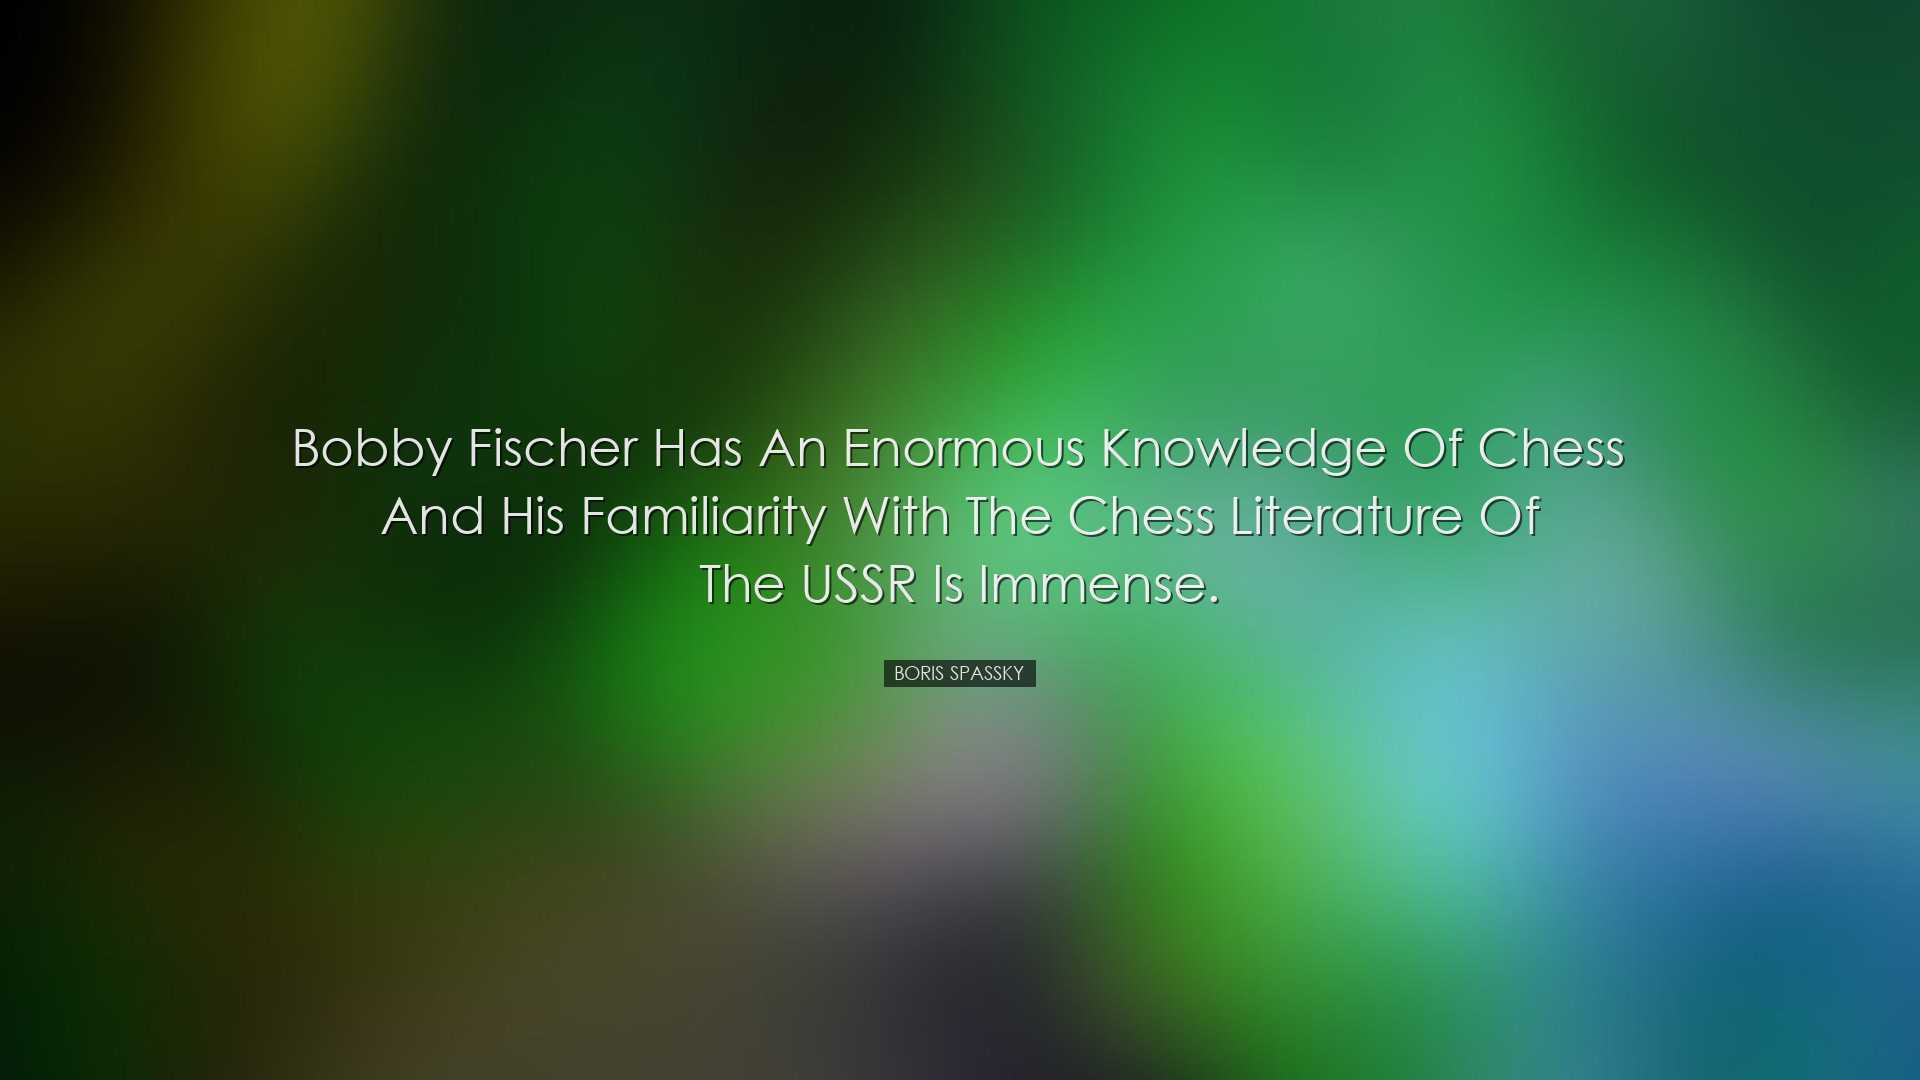 Bobby Fischer has an enormous knowledge of chess and his familiari